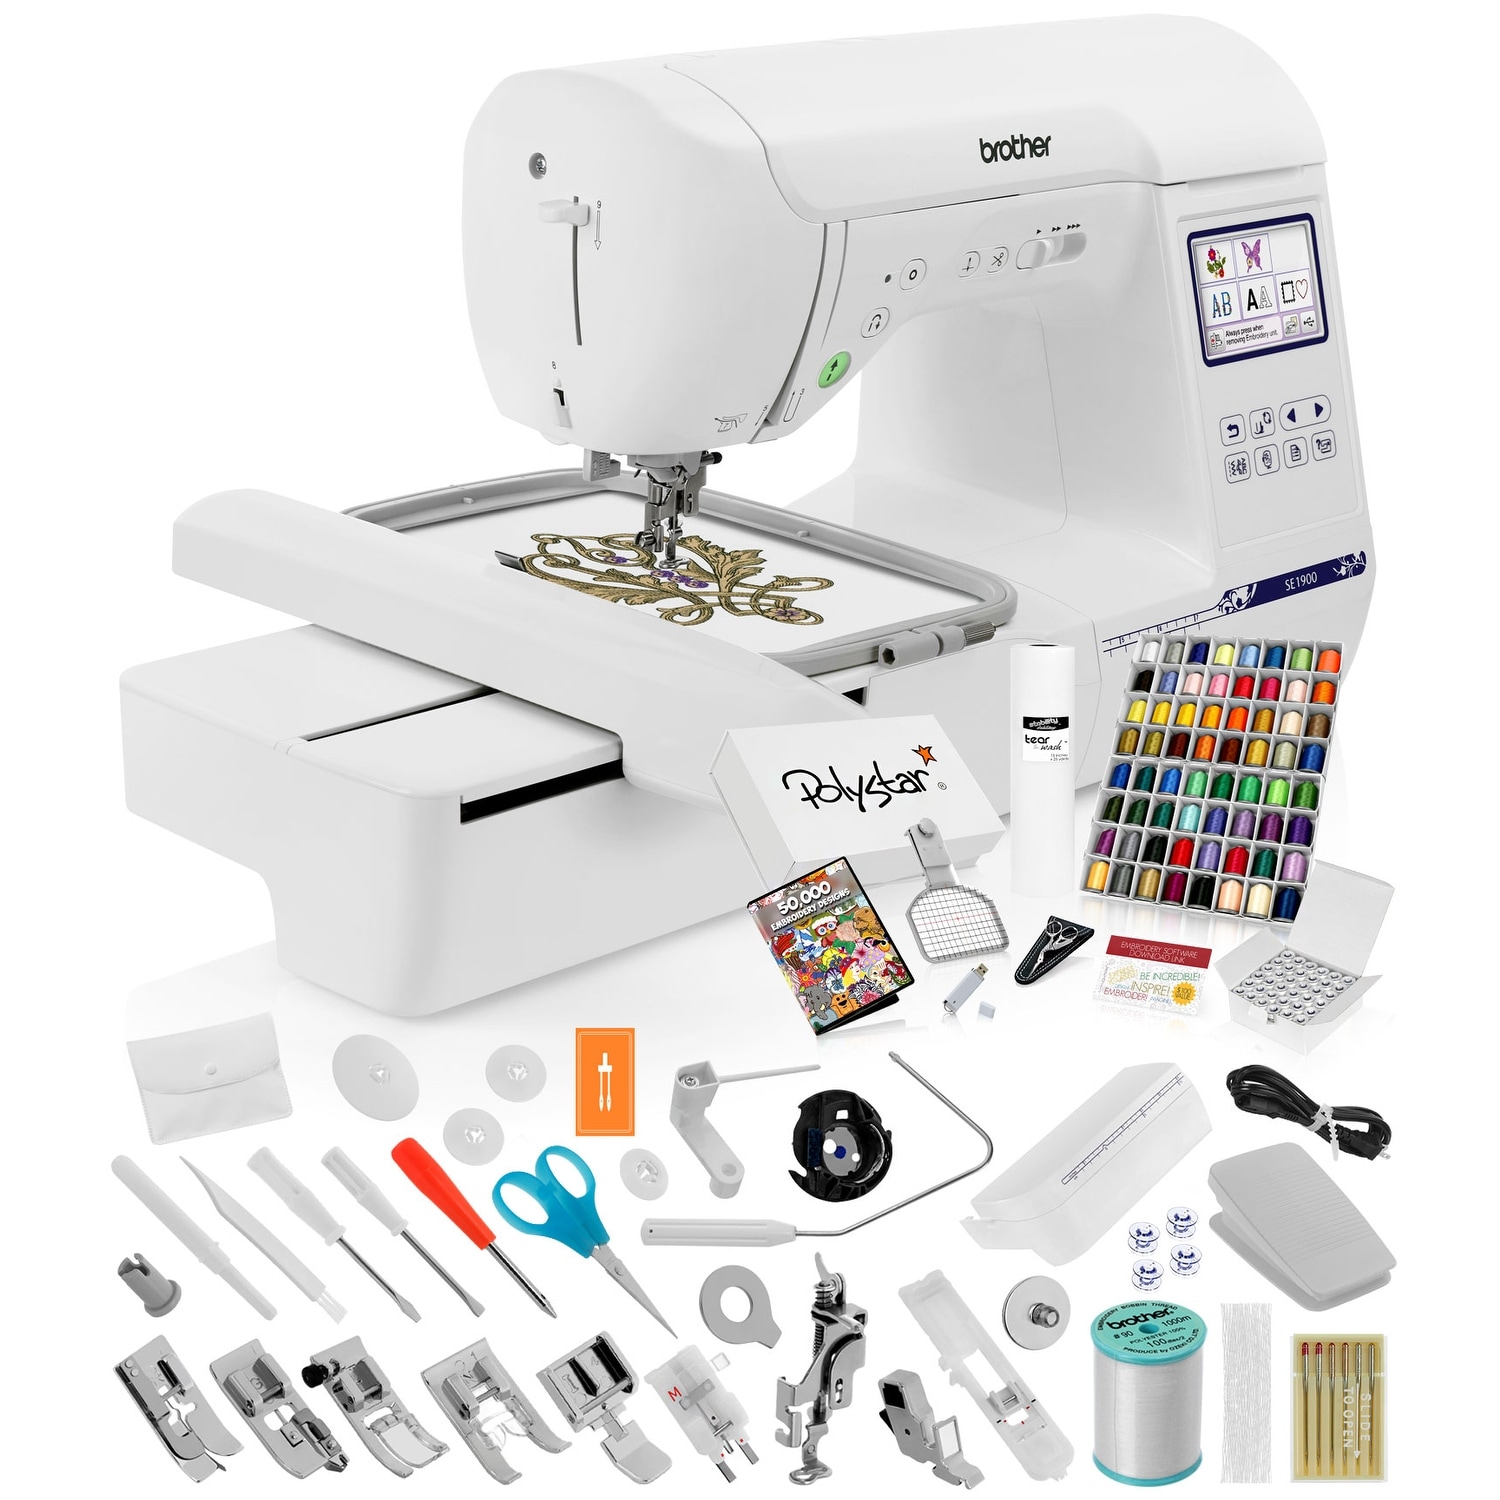 Brother SE1900 Sewing and Embroidery Machine w/ Grand Slam Package Includes  64 Embroidery Threads + Prewound Bobbins + More - Bed Bath & Beyond -  20978988